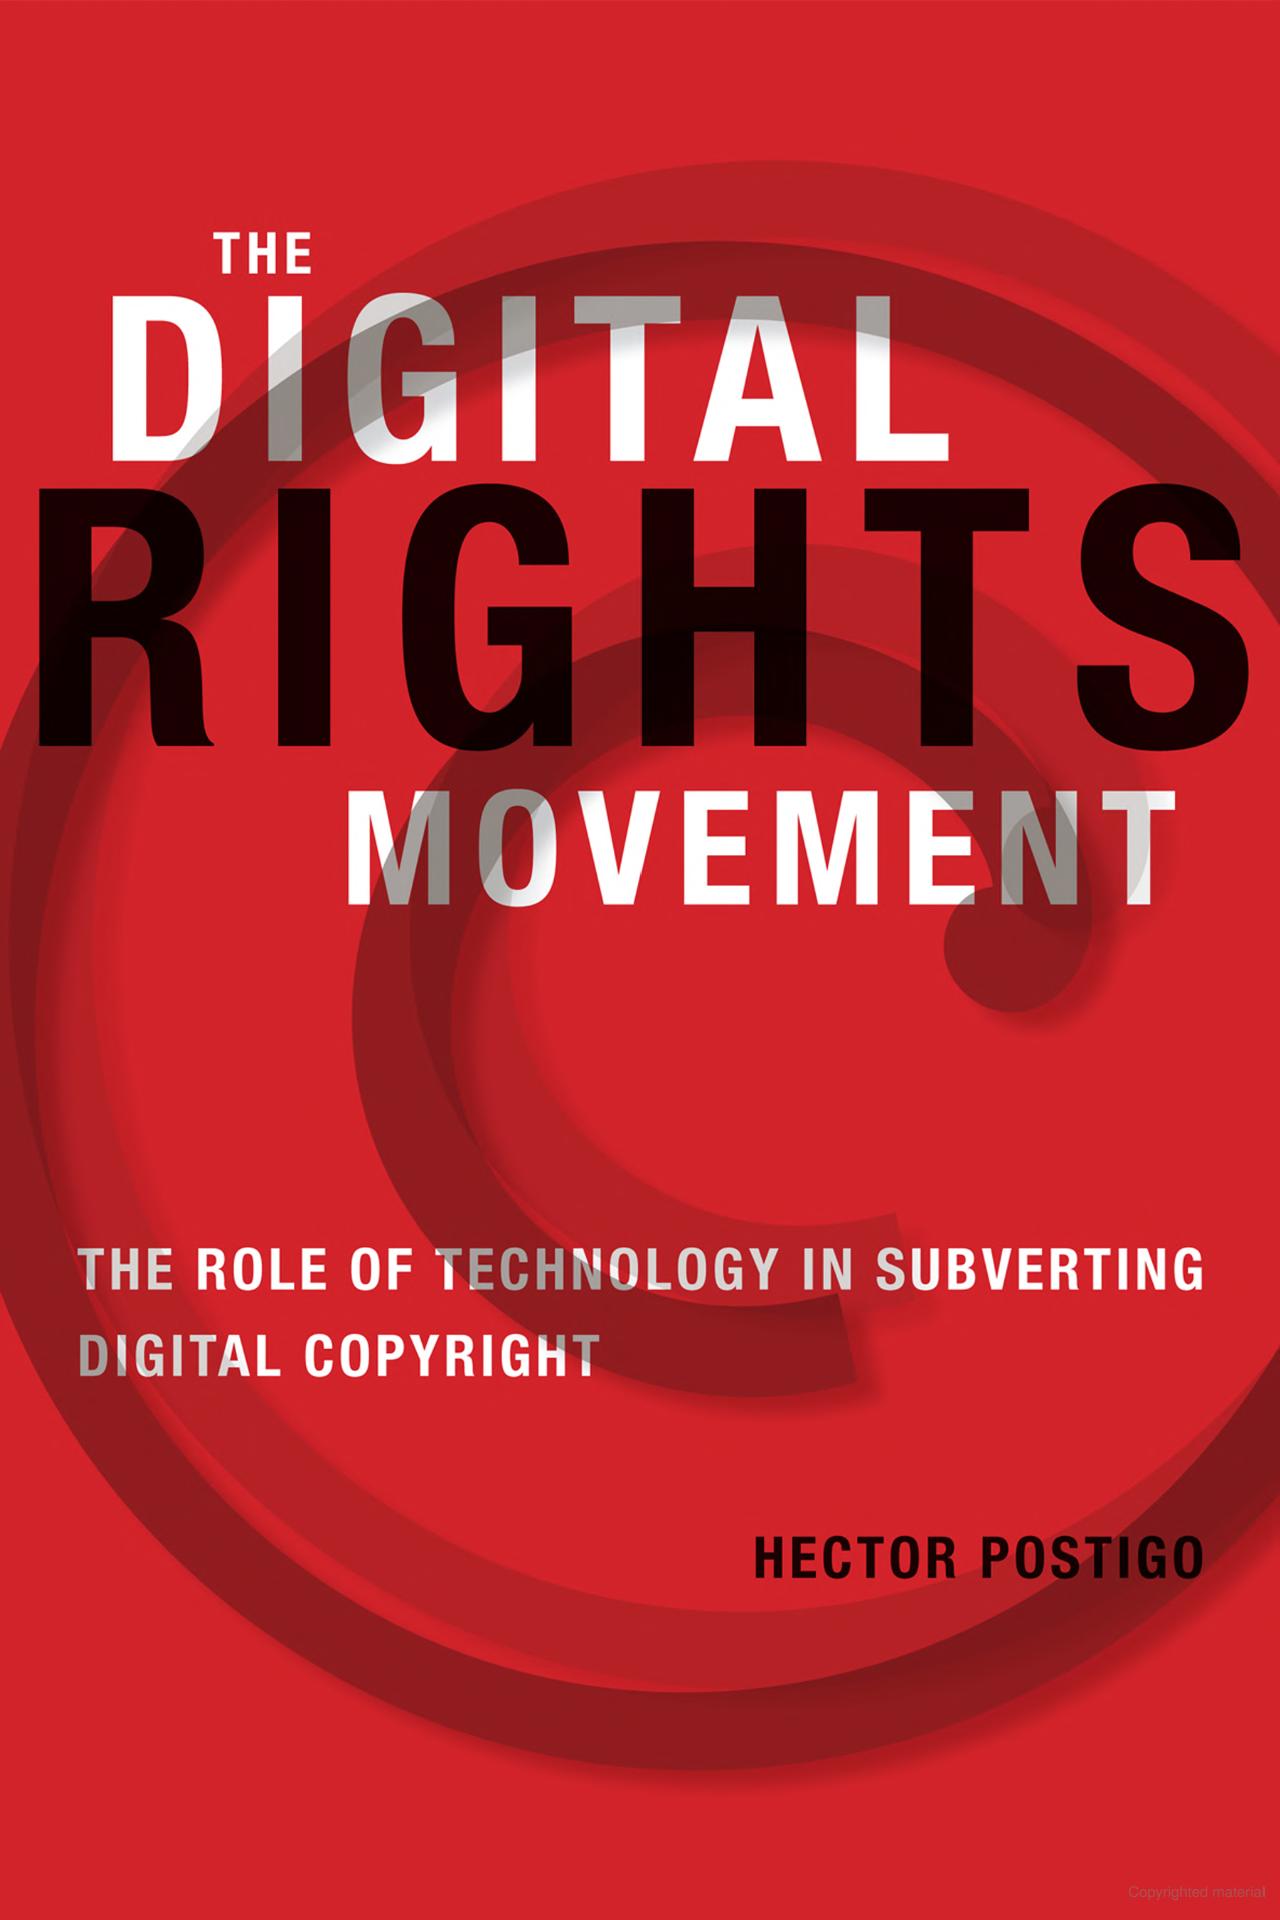 The digital rights movement the role of technology in subverting digital copyright